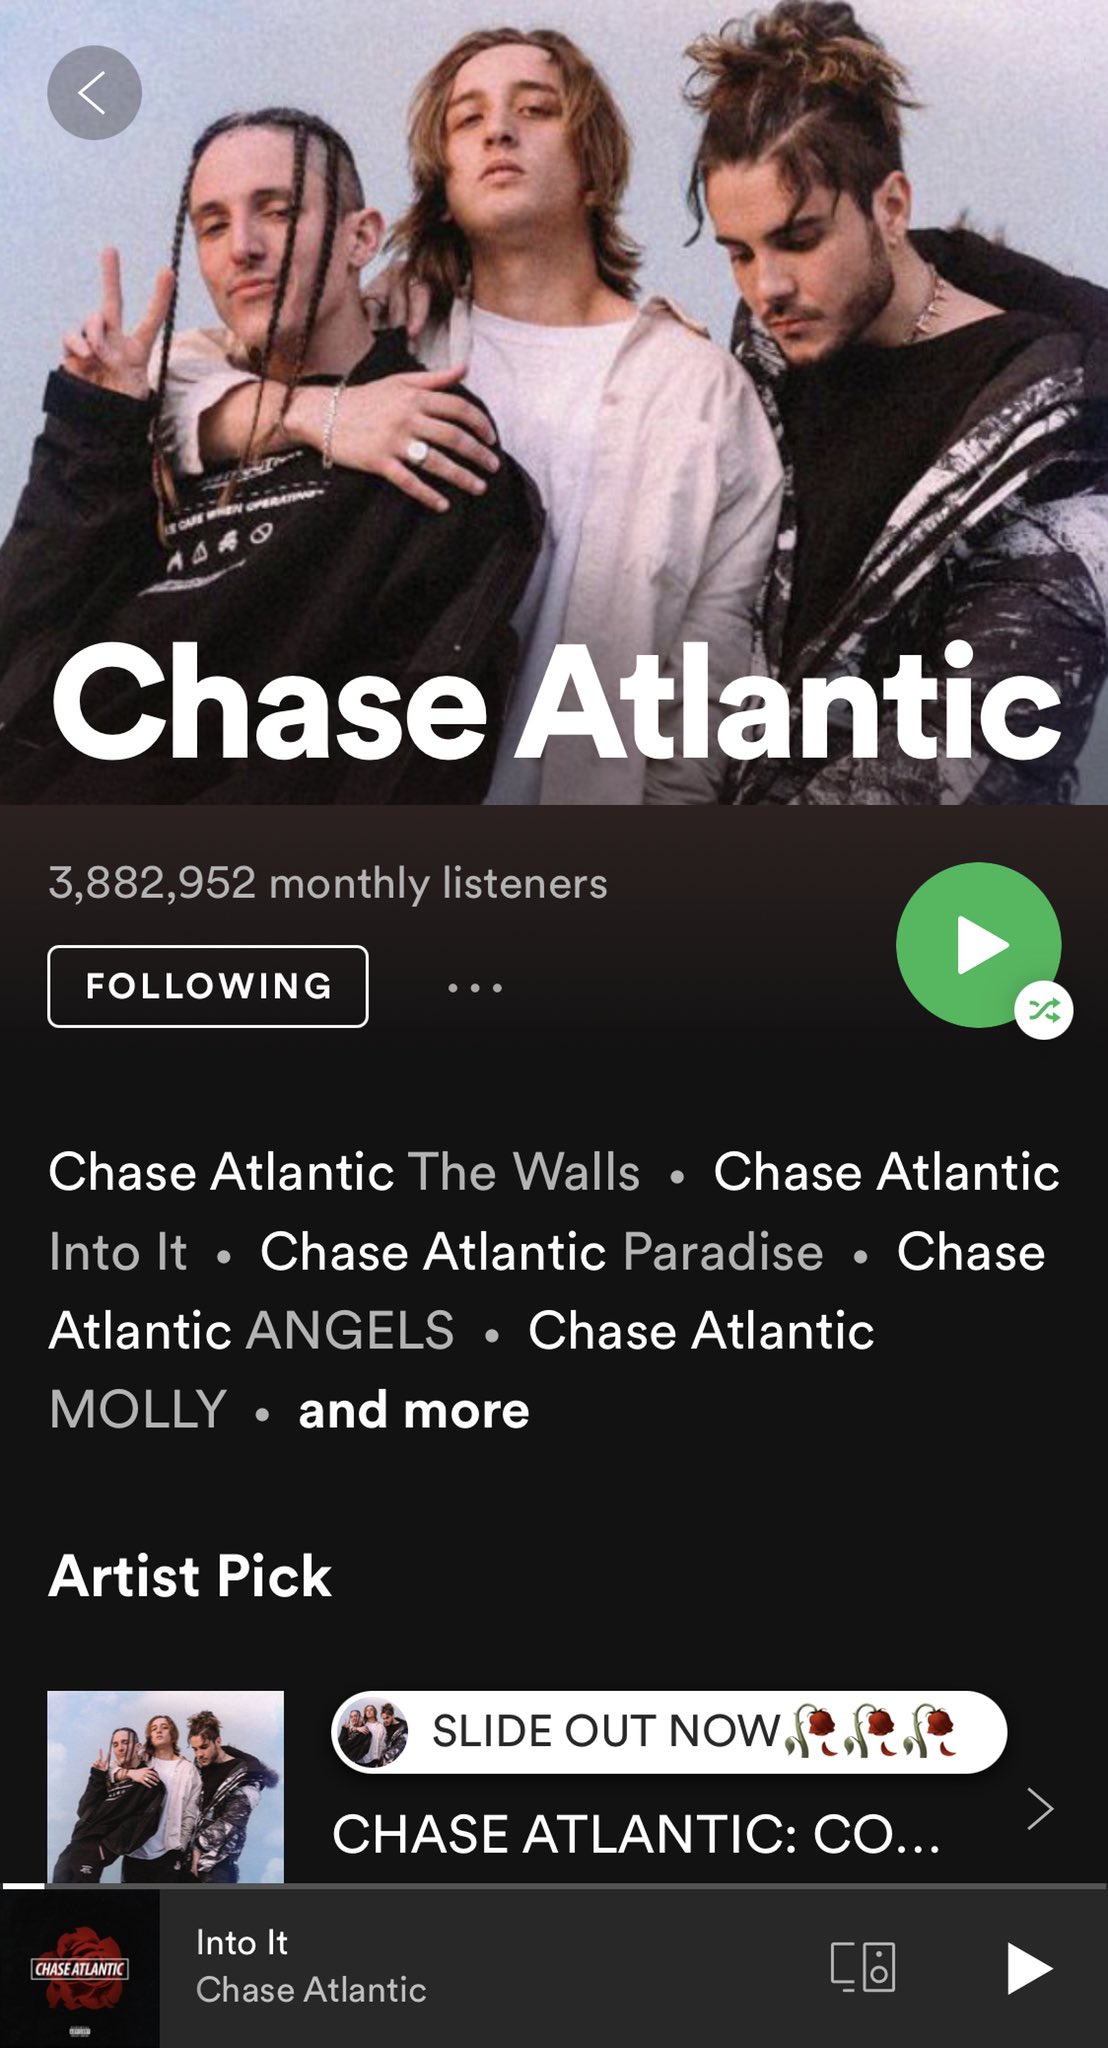 CHASE ATLANTIC on X: HELLO CAN U PLZ FOLLOW THESE @Spotify PLAYLISTS AND  TWEET OUR FRIENDS OVER THERE ABOUT SLIDE? TRYNA SEE SOMETHING 🤔     / X